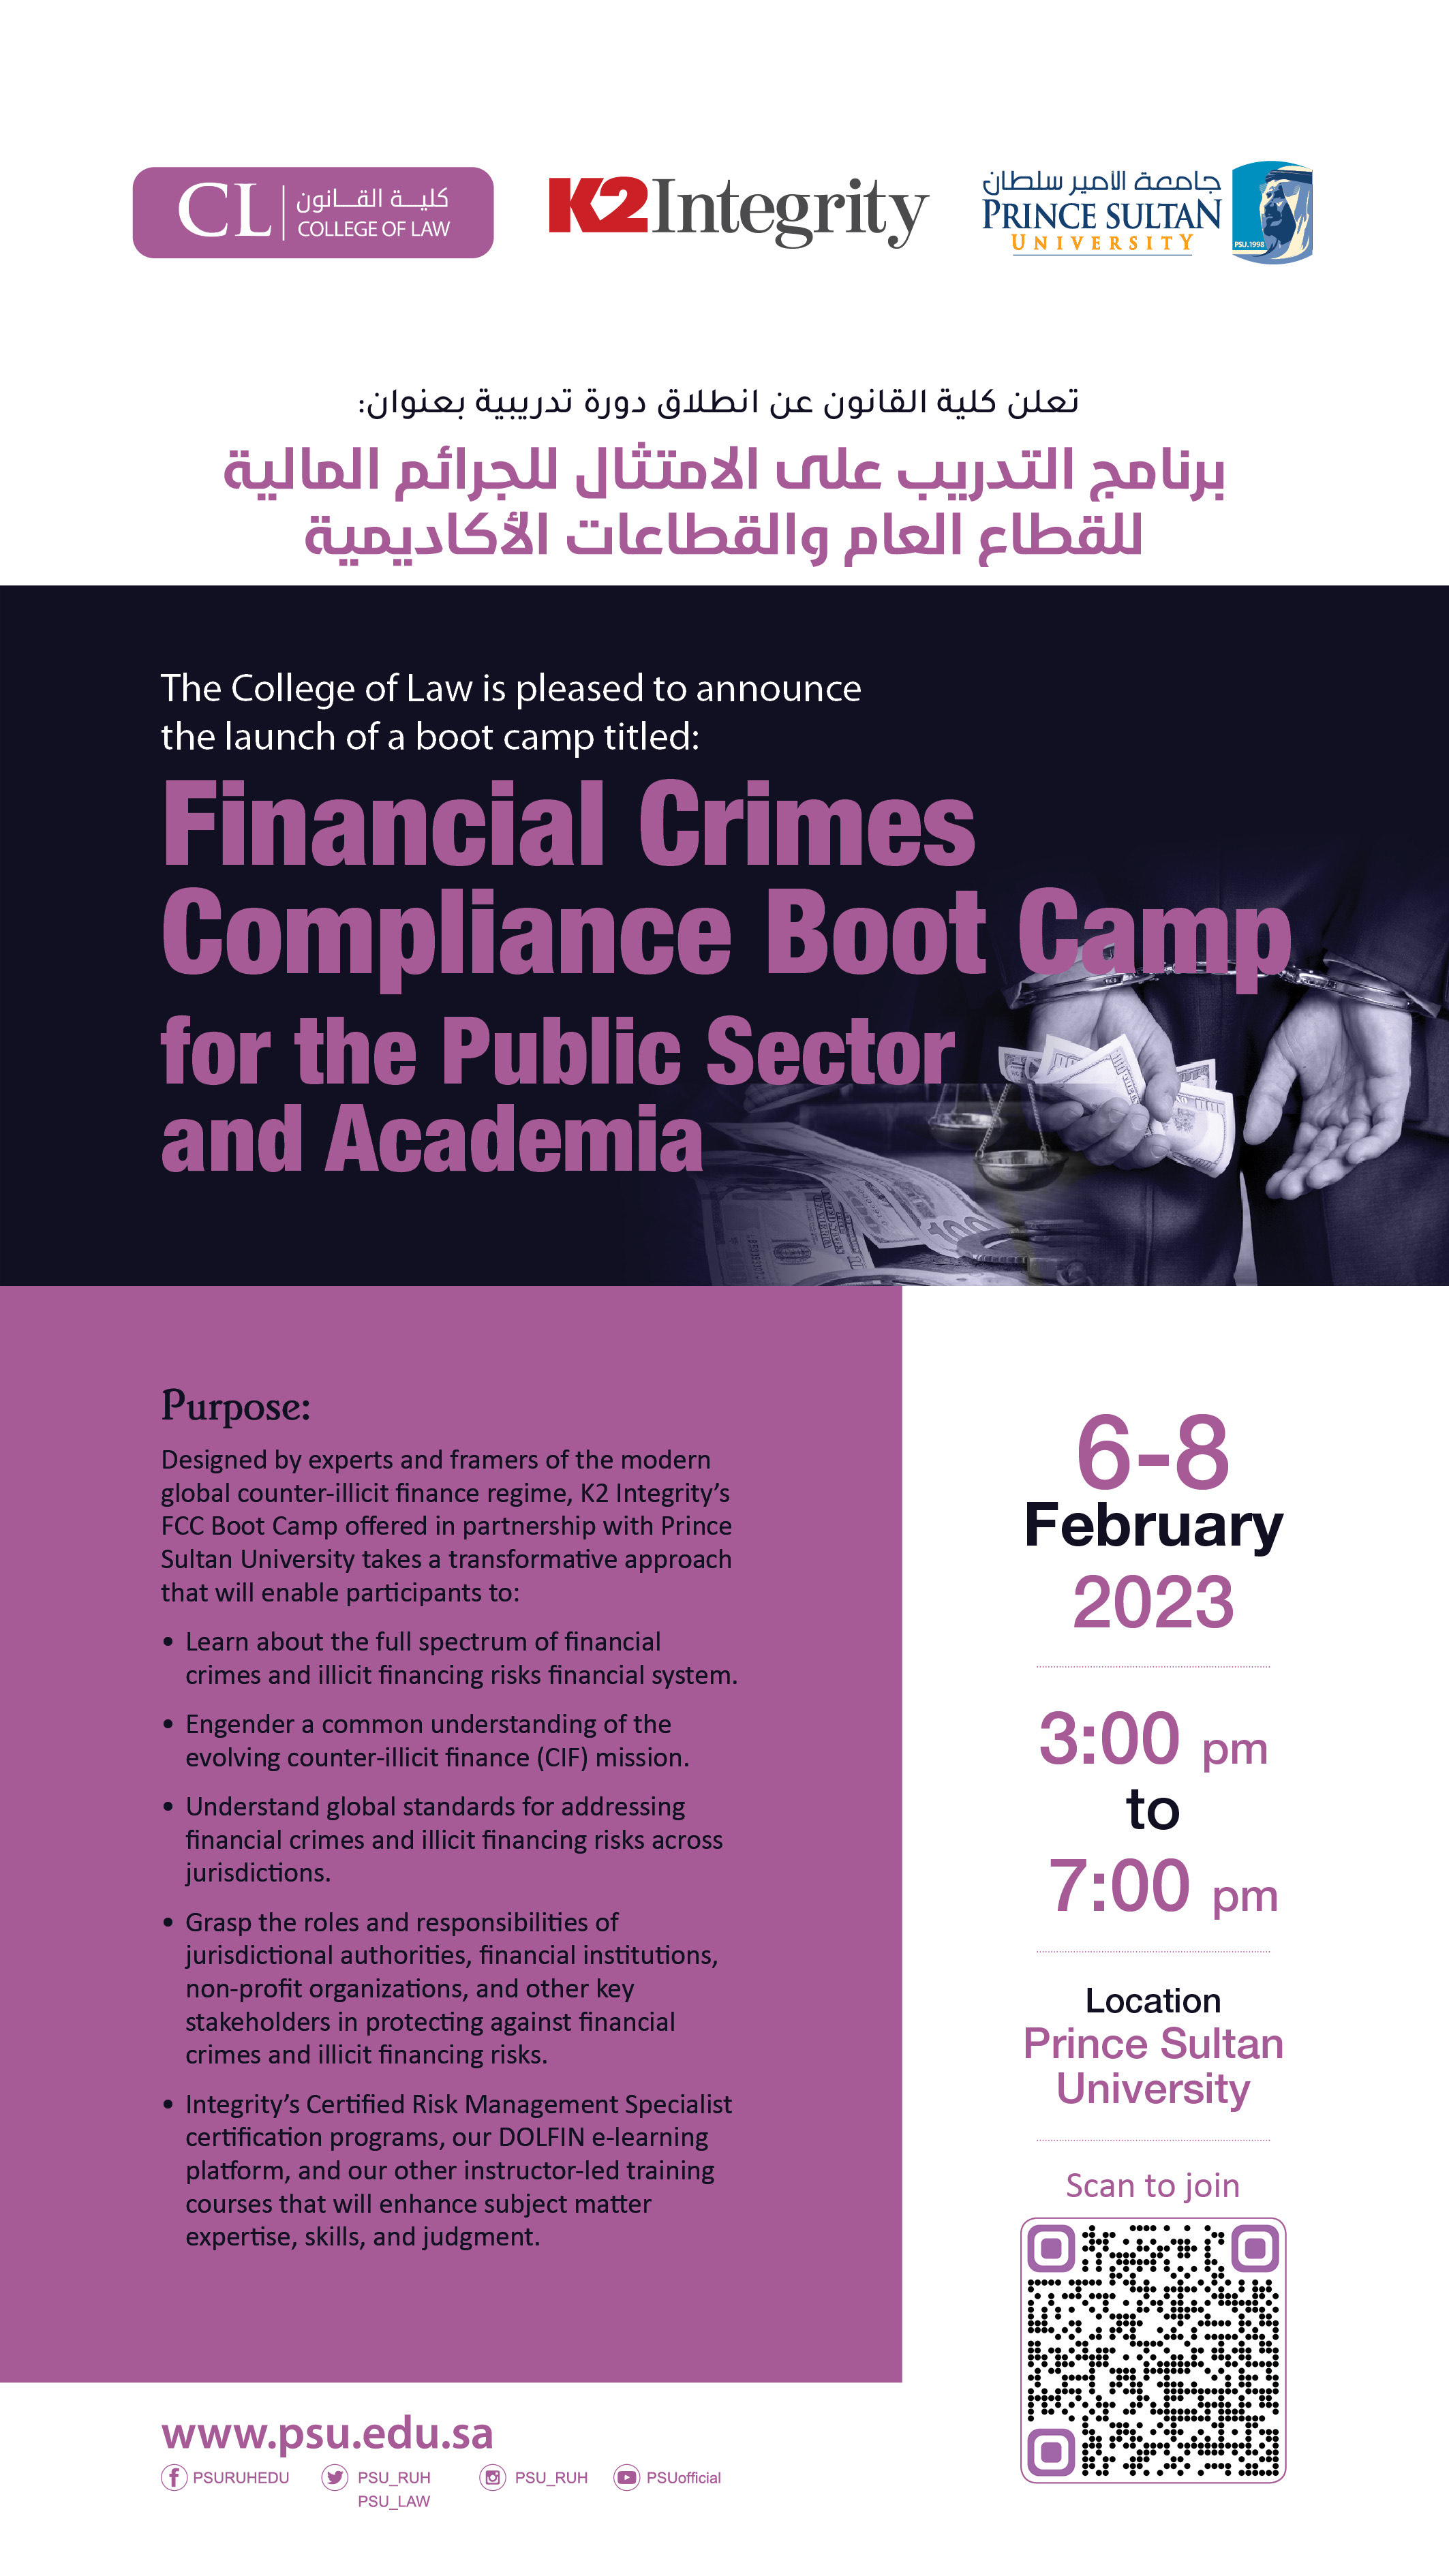 “Financial Crime Compliance” Course in Cooperation with K2 Integrity